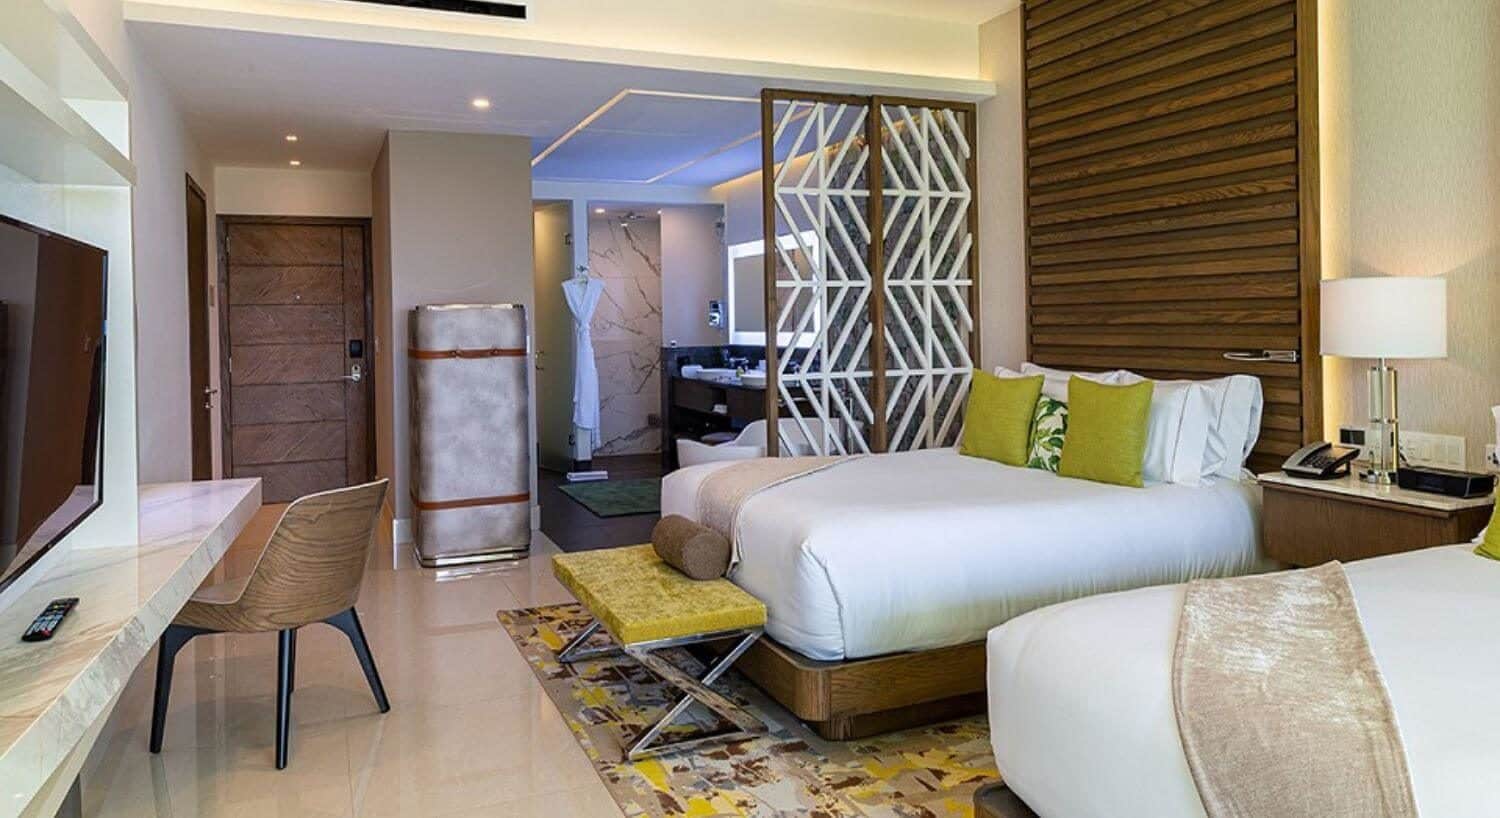 A bedroom with 2 queen beds, a flat screen TV on the opposite wall, a writing desk and chair with lit mirror above it, a tall stainless steel trunk on a wall near the beds, and a bathroom with deep soaking tub, walk in shower, and vanity with double sinks and lit mirror above the vanity.